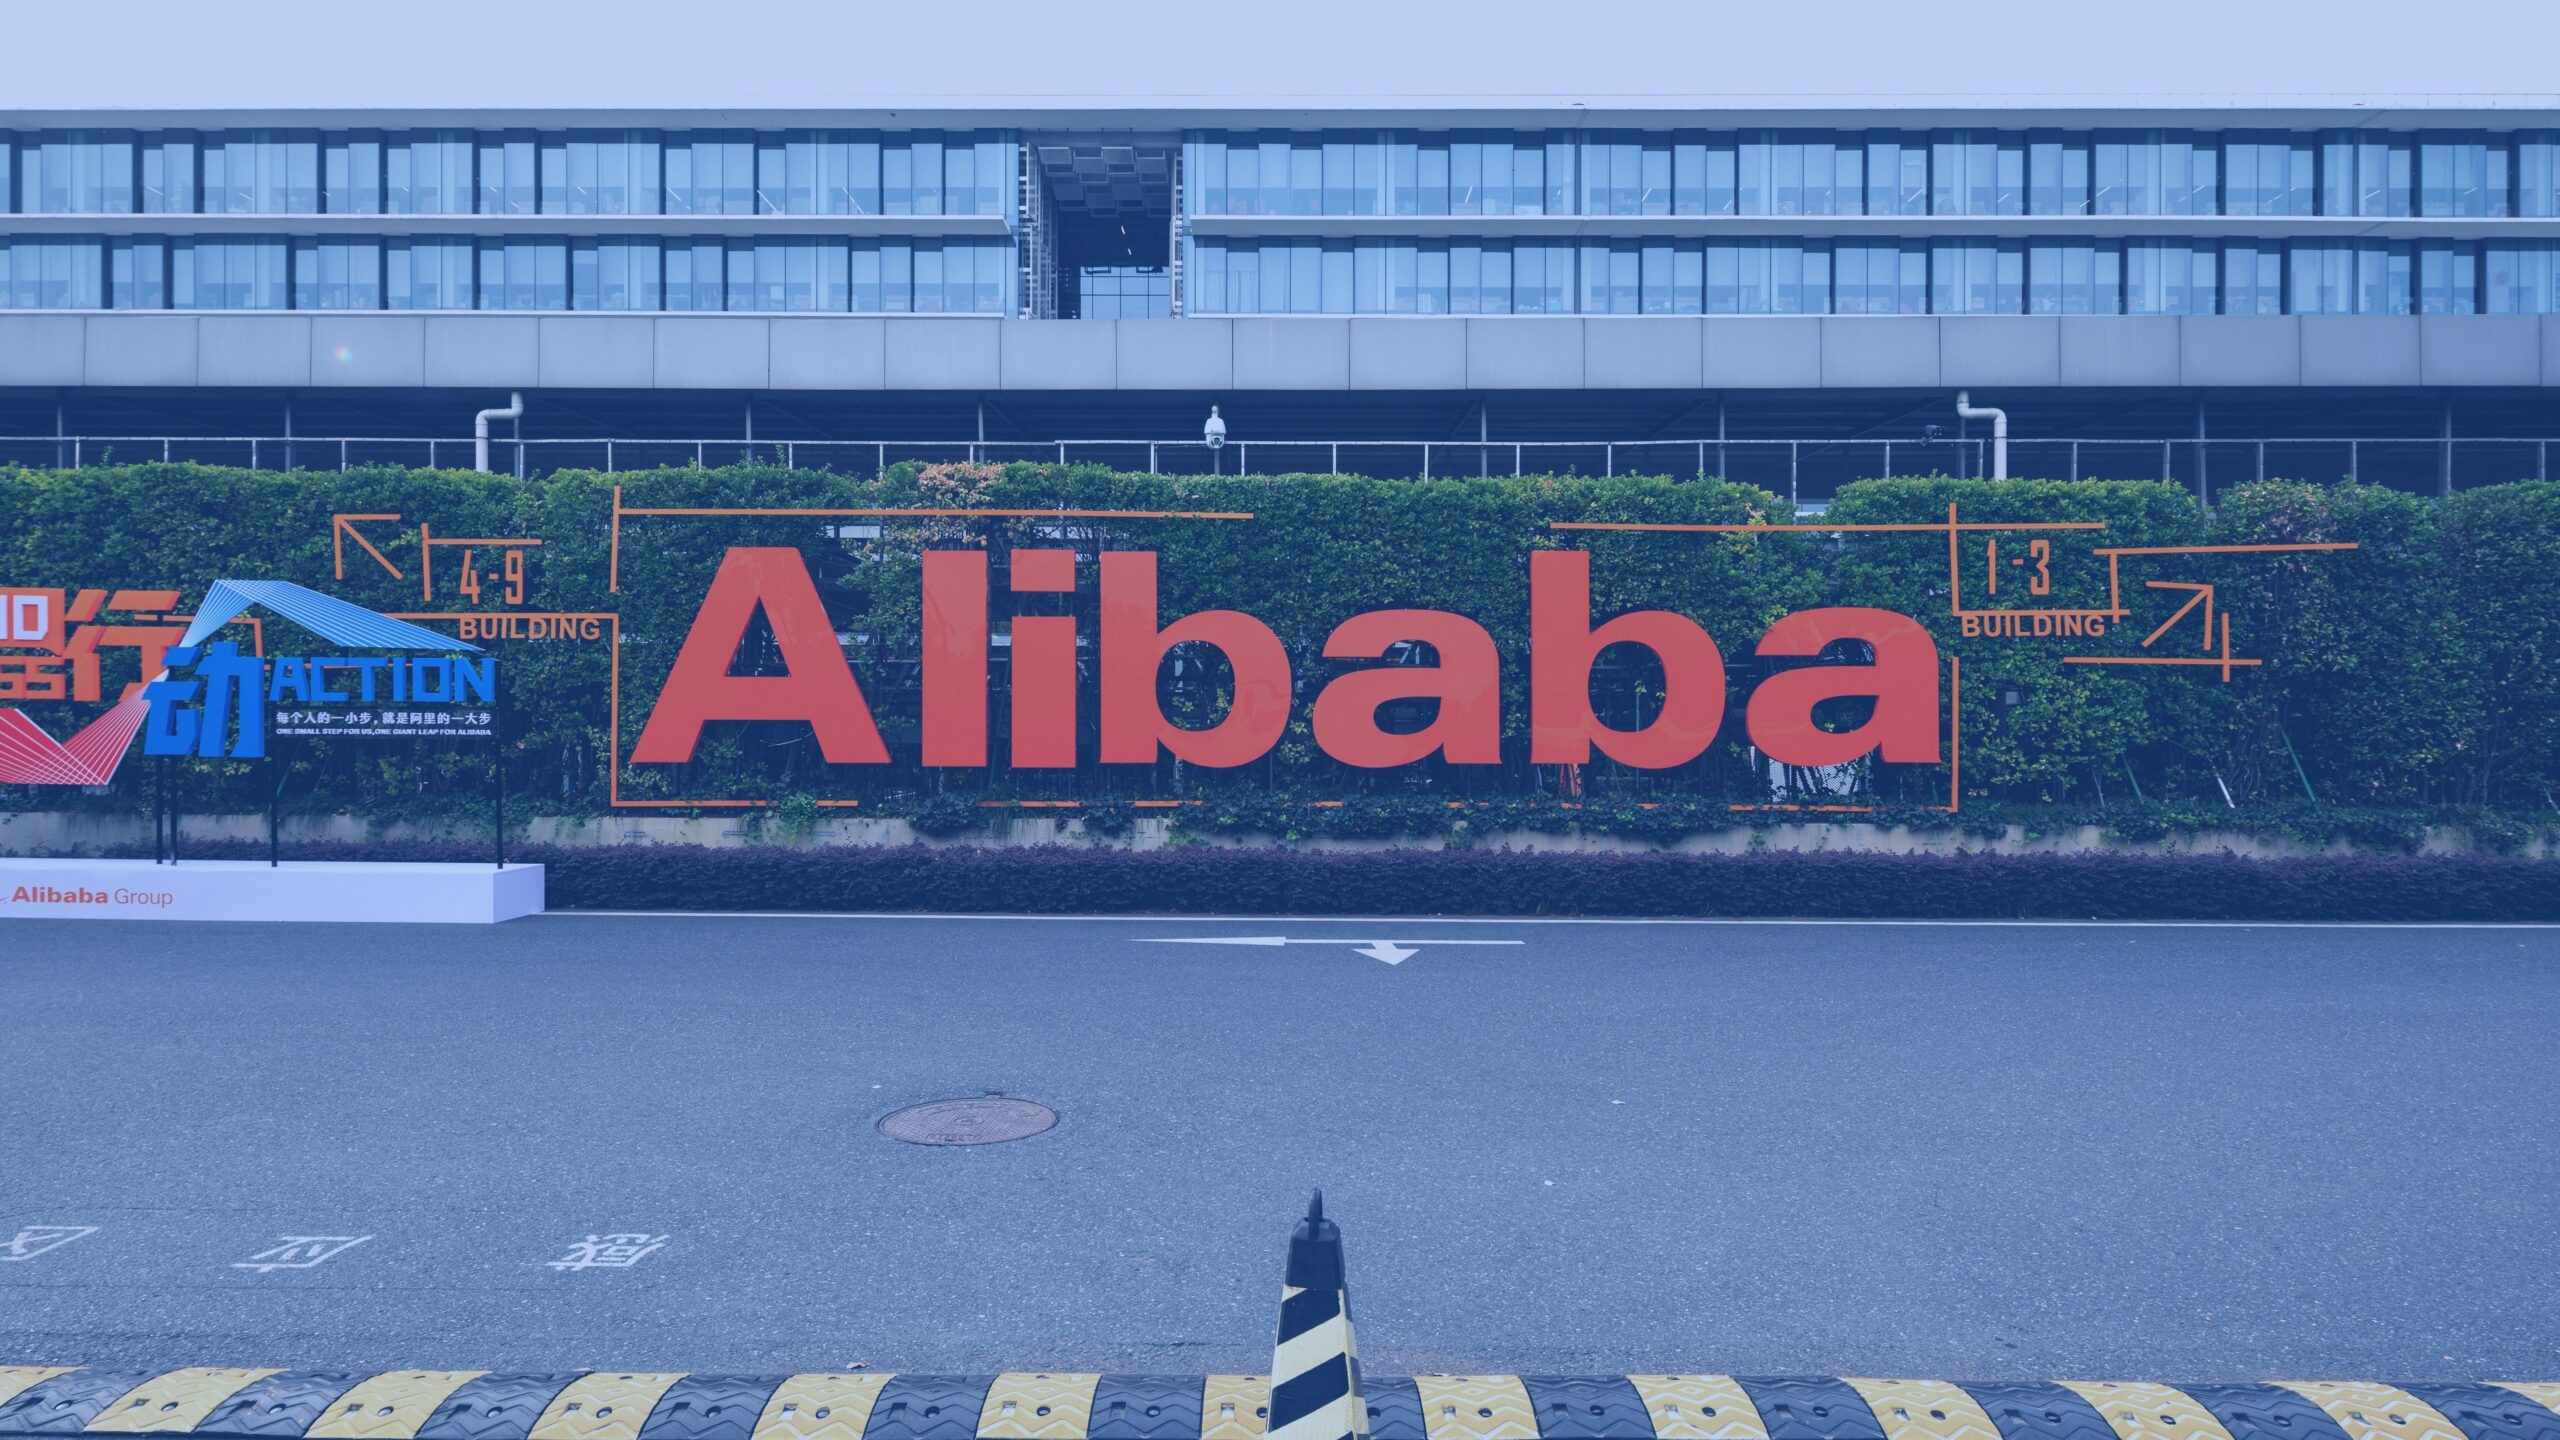 Alibaba Group: The 31st-largest public company in the world on the Forbes Global 2000 2020 list. 2560x1440 HD Wallpaper.